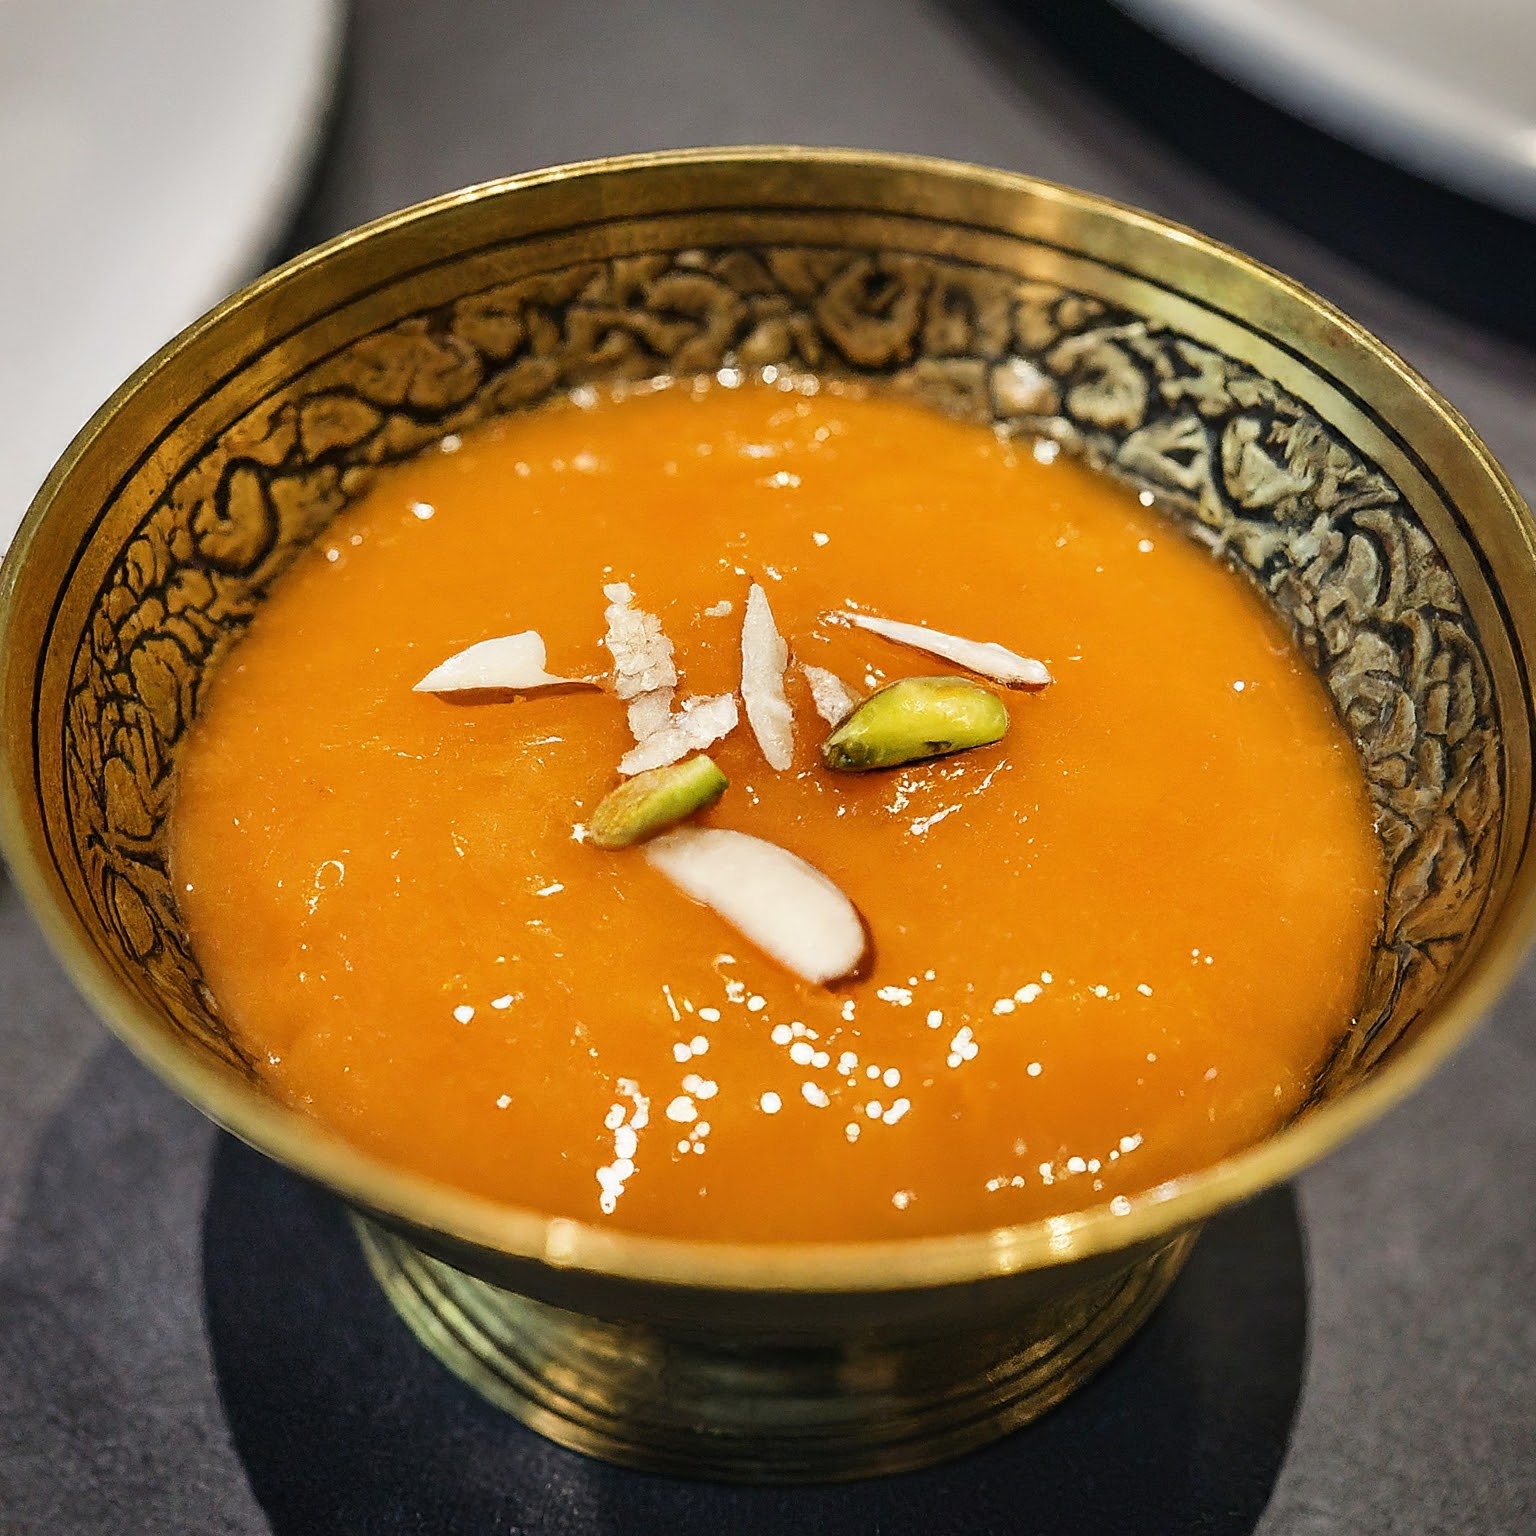 A close-up view of a bowl of Aamras, a thick and creamy Indian mango puree dessert.